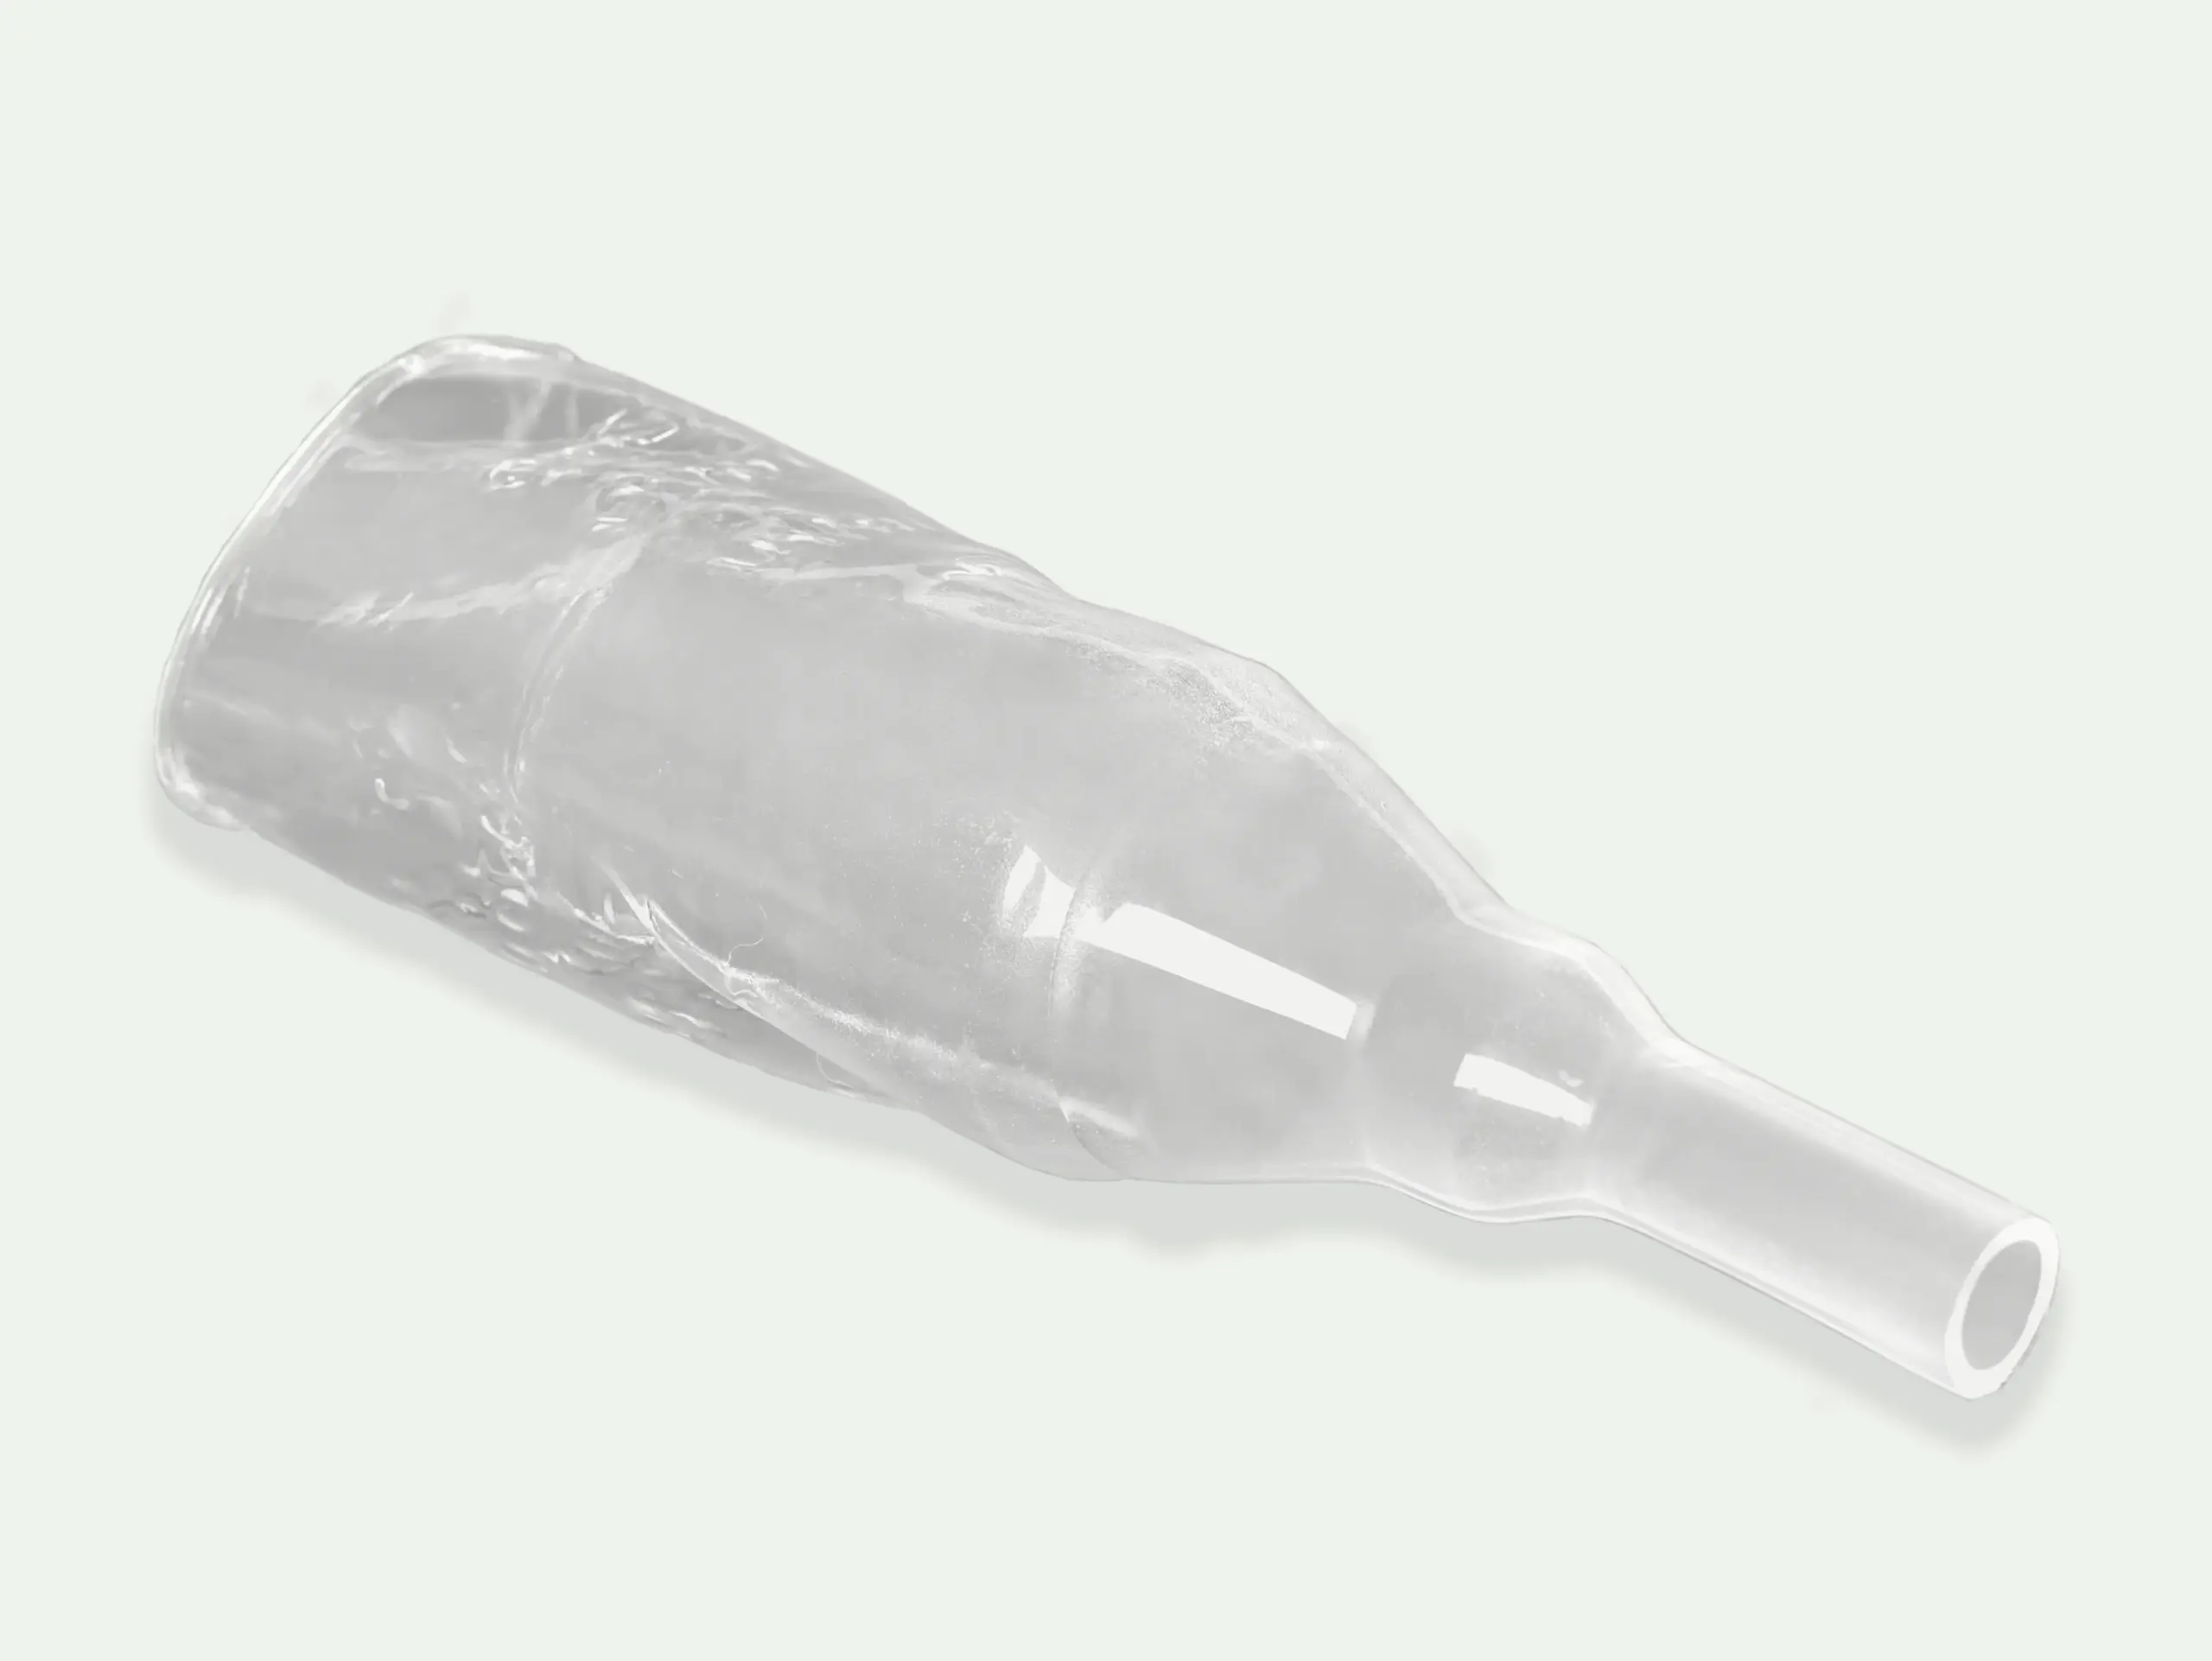 Picture of external condom catheter, Pop-On by BD and Bard from RA Fischer.